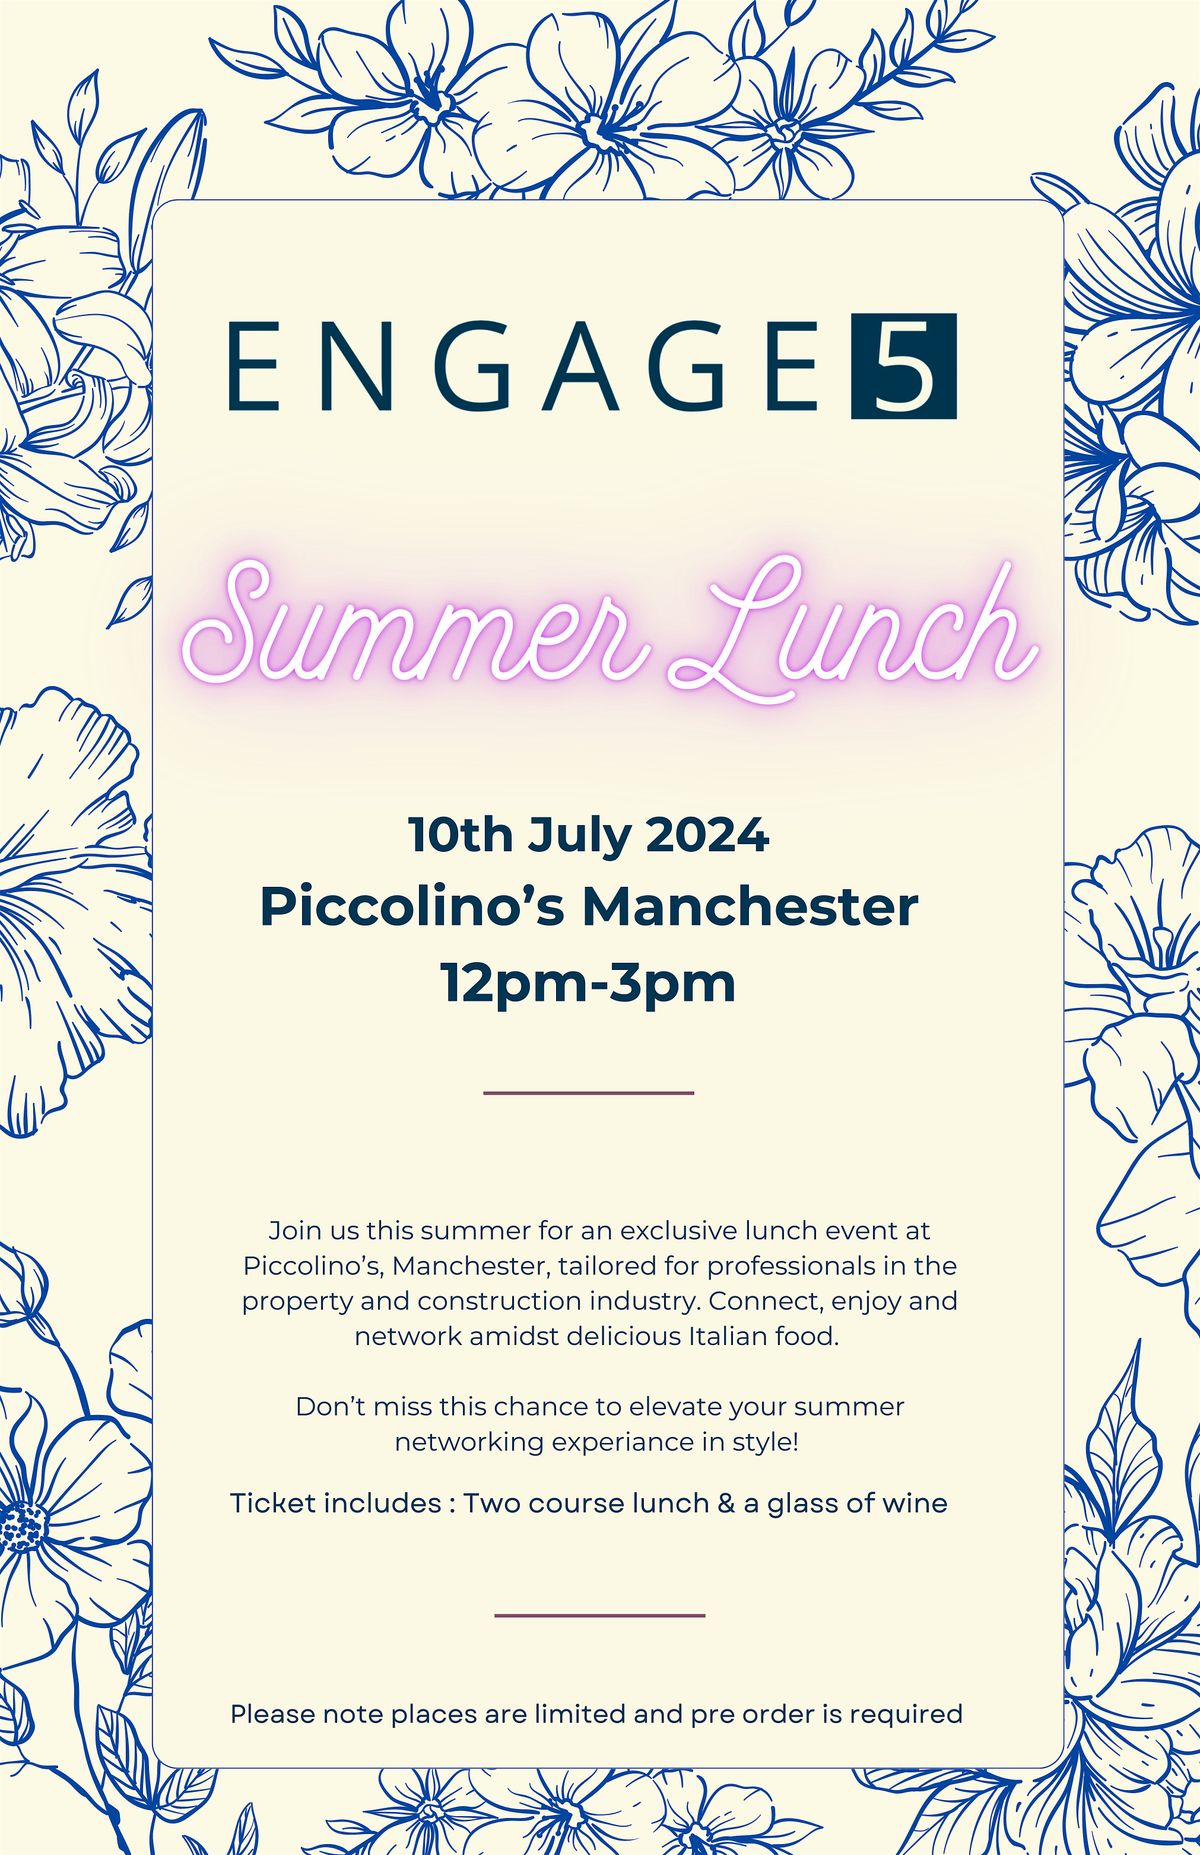 Engage 5 Summer Lunch